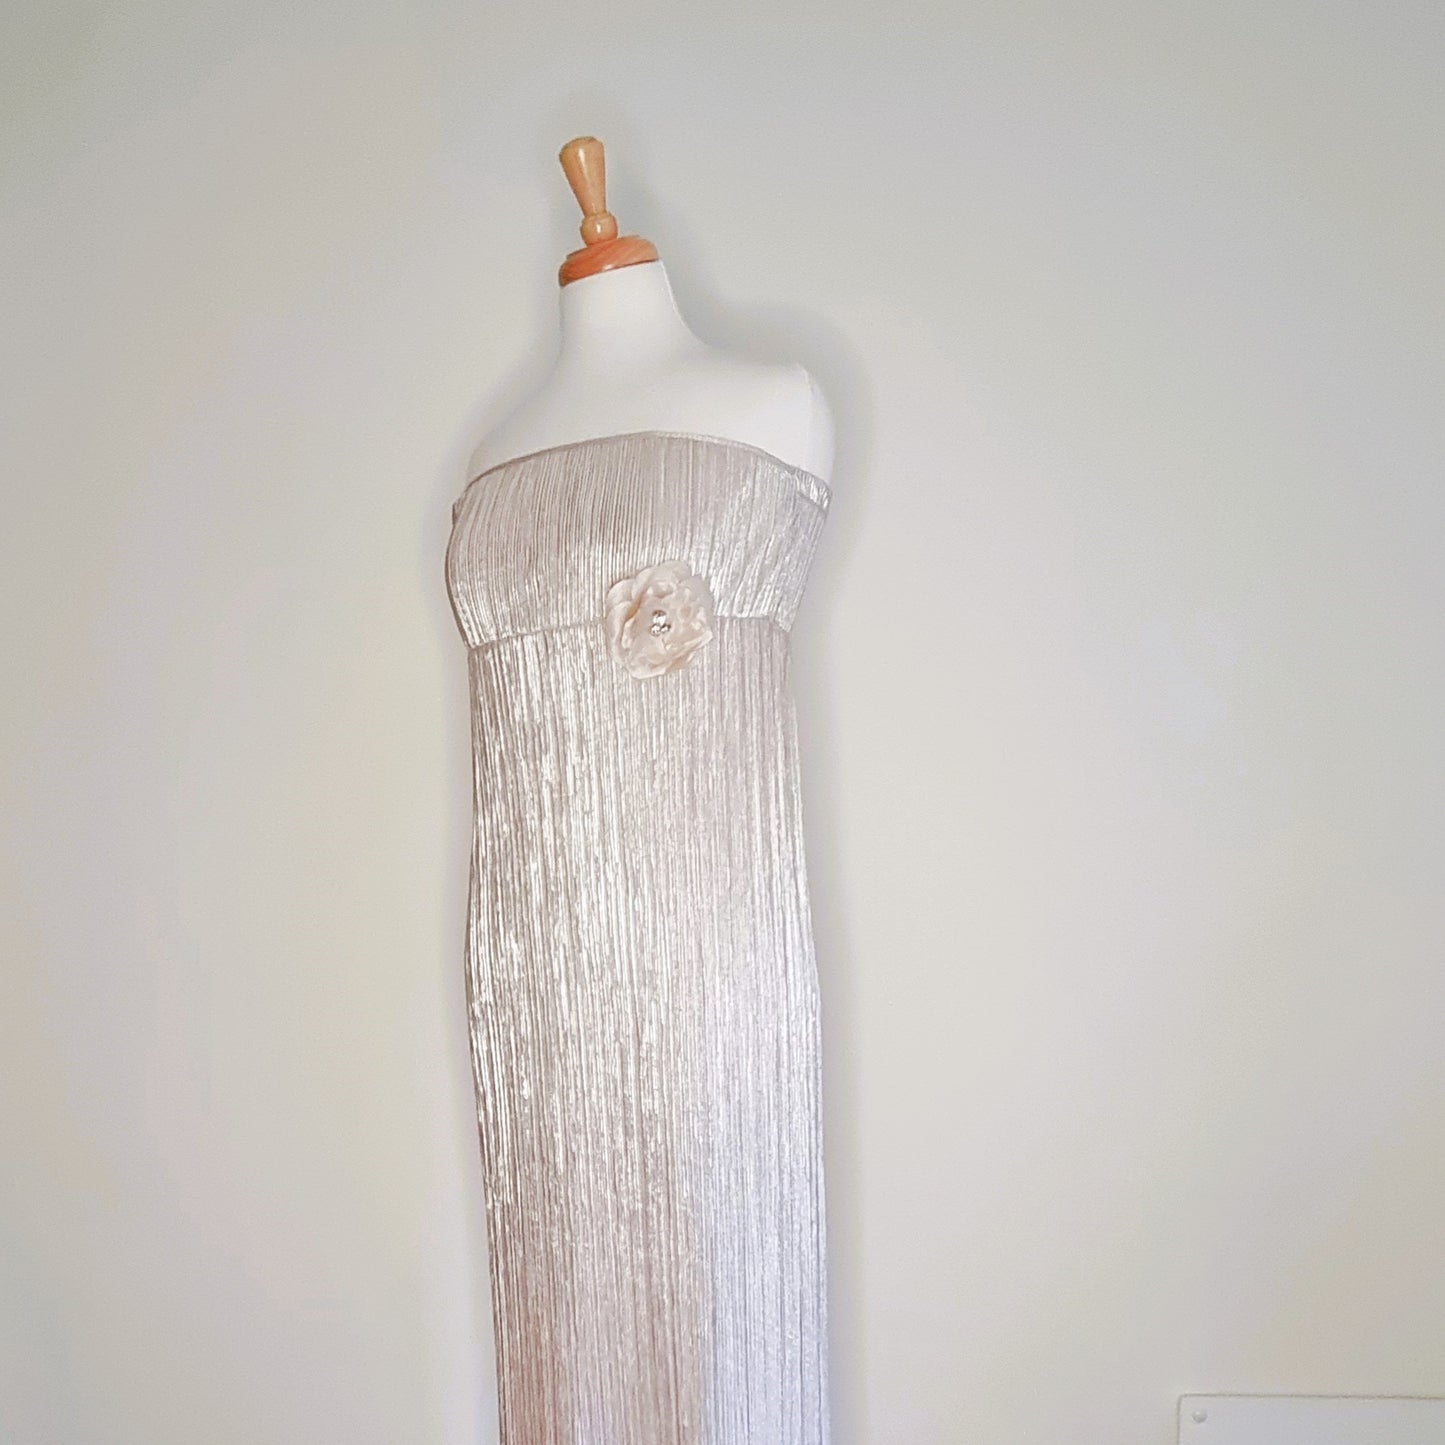 Oasis by Foschini - Gold crushed shimmer strapless maxi dress